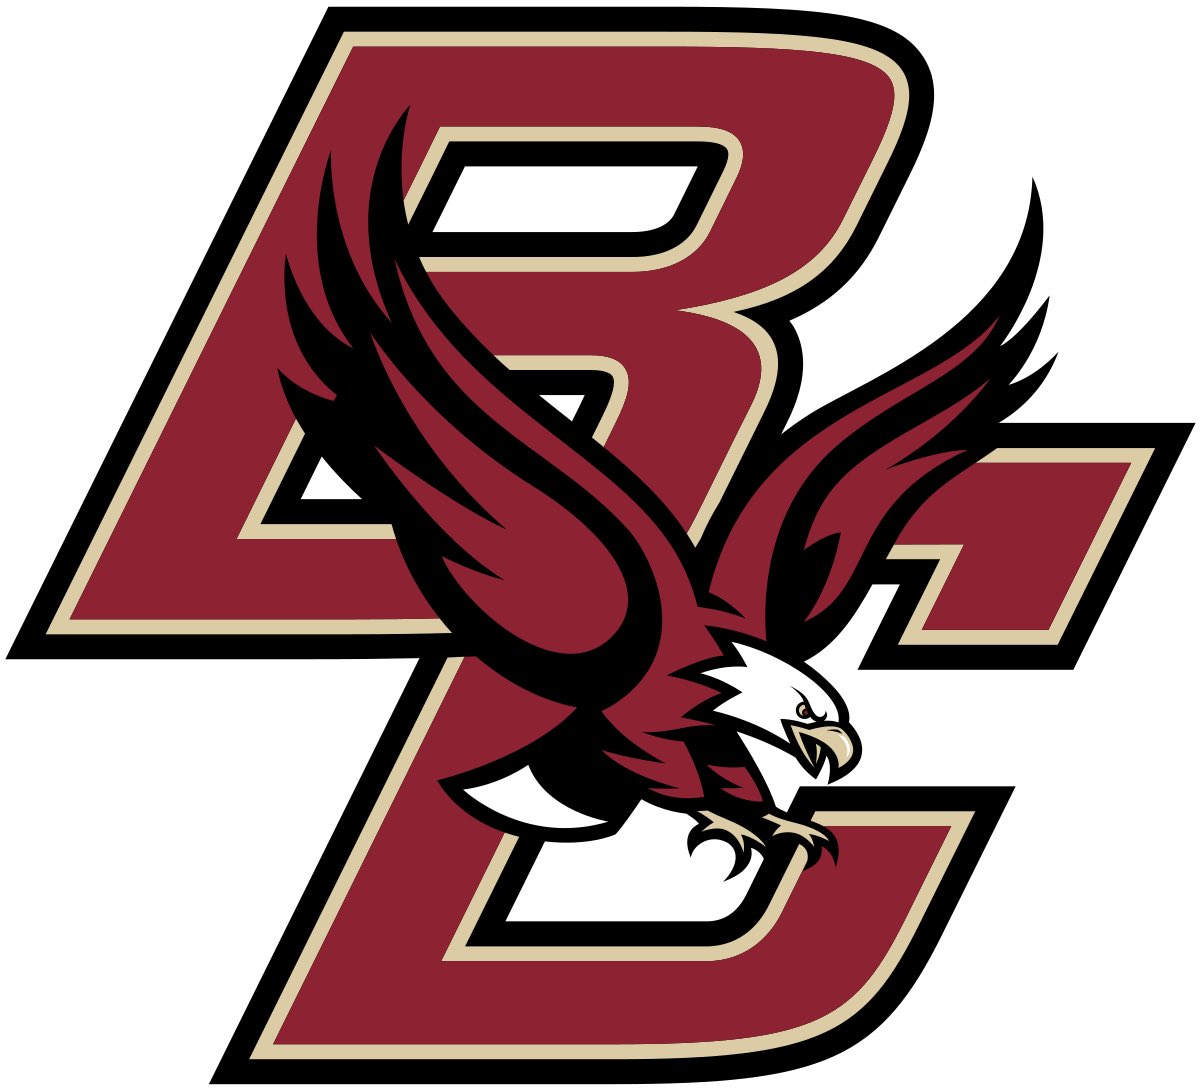 Blessed to receive an offer from Boston College !! @BCFootball @Coach_Applebaum @SpencerD_BCFB @Coach_Sheirer